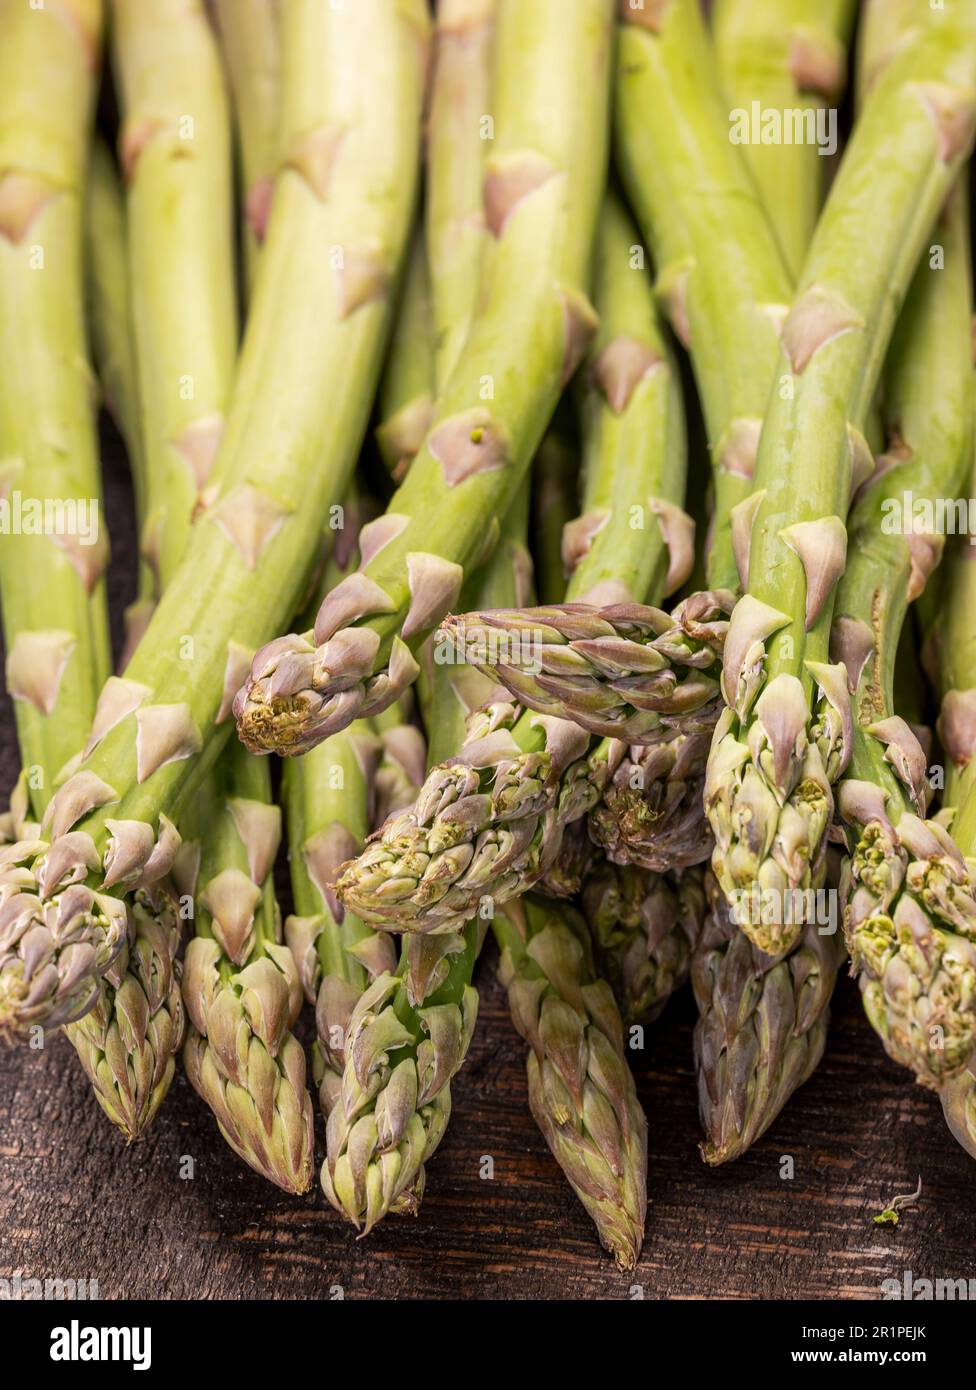 Close up of fresh and raw green asparagus spears on old wooden board Stock Photo